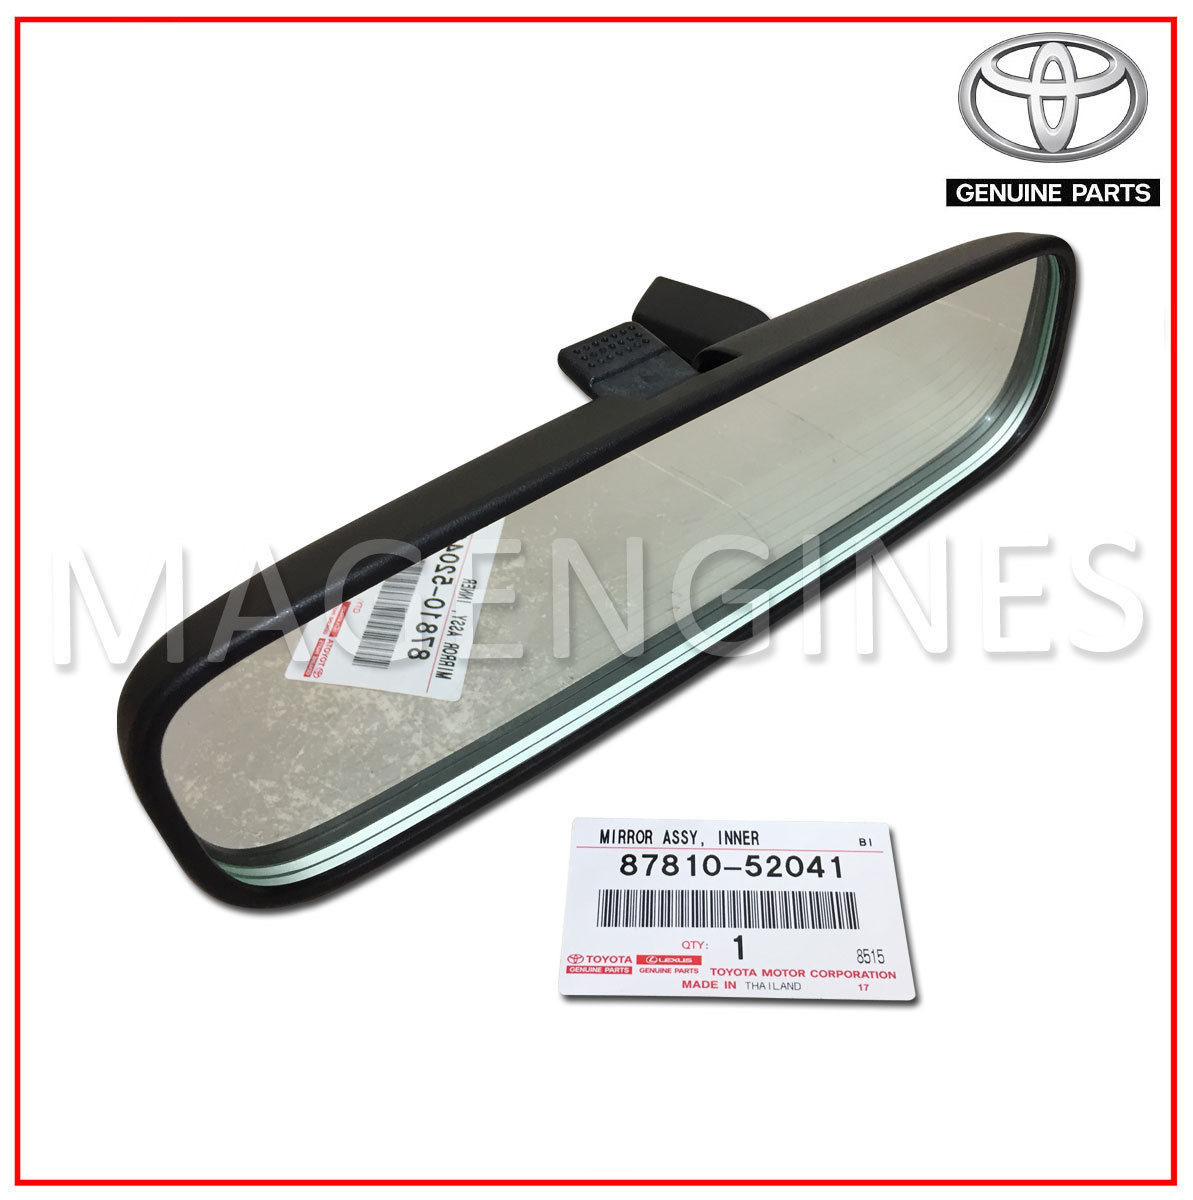 Genuine Toyota 87834-22040-03 Rear View Mirror Stay Holder Cover 